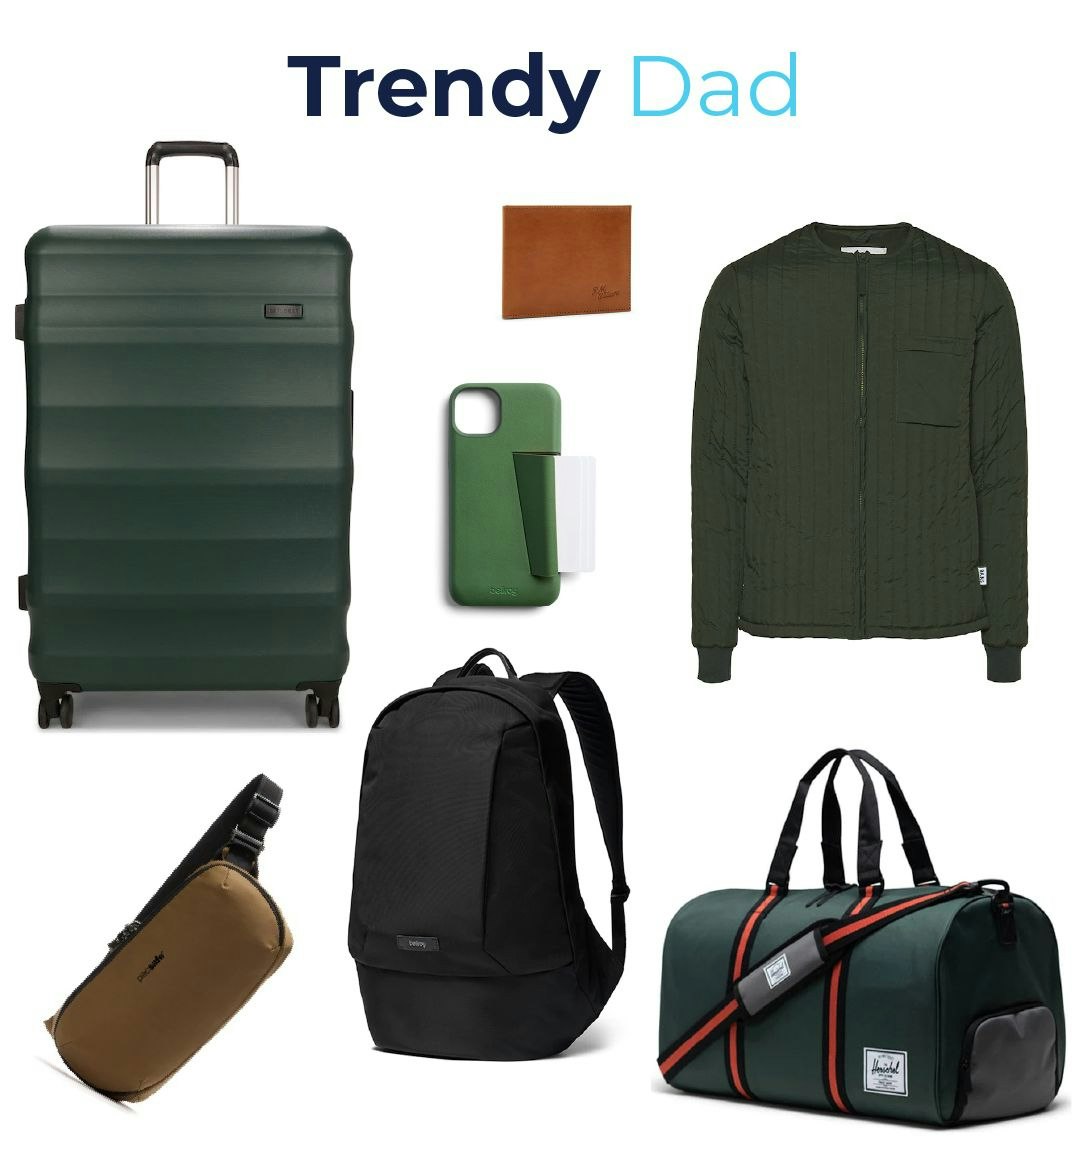 Products of gift ideas for a Trendy Dad